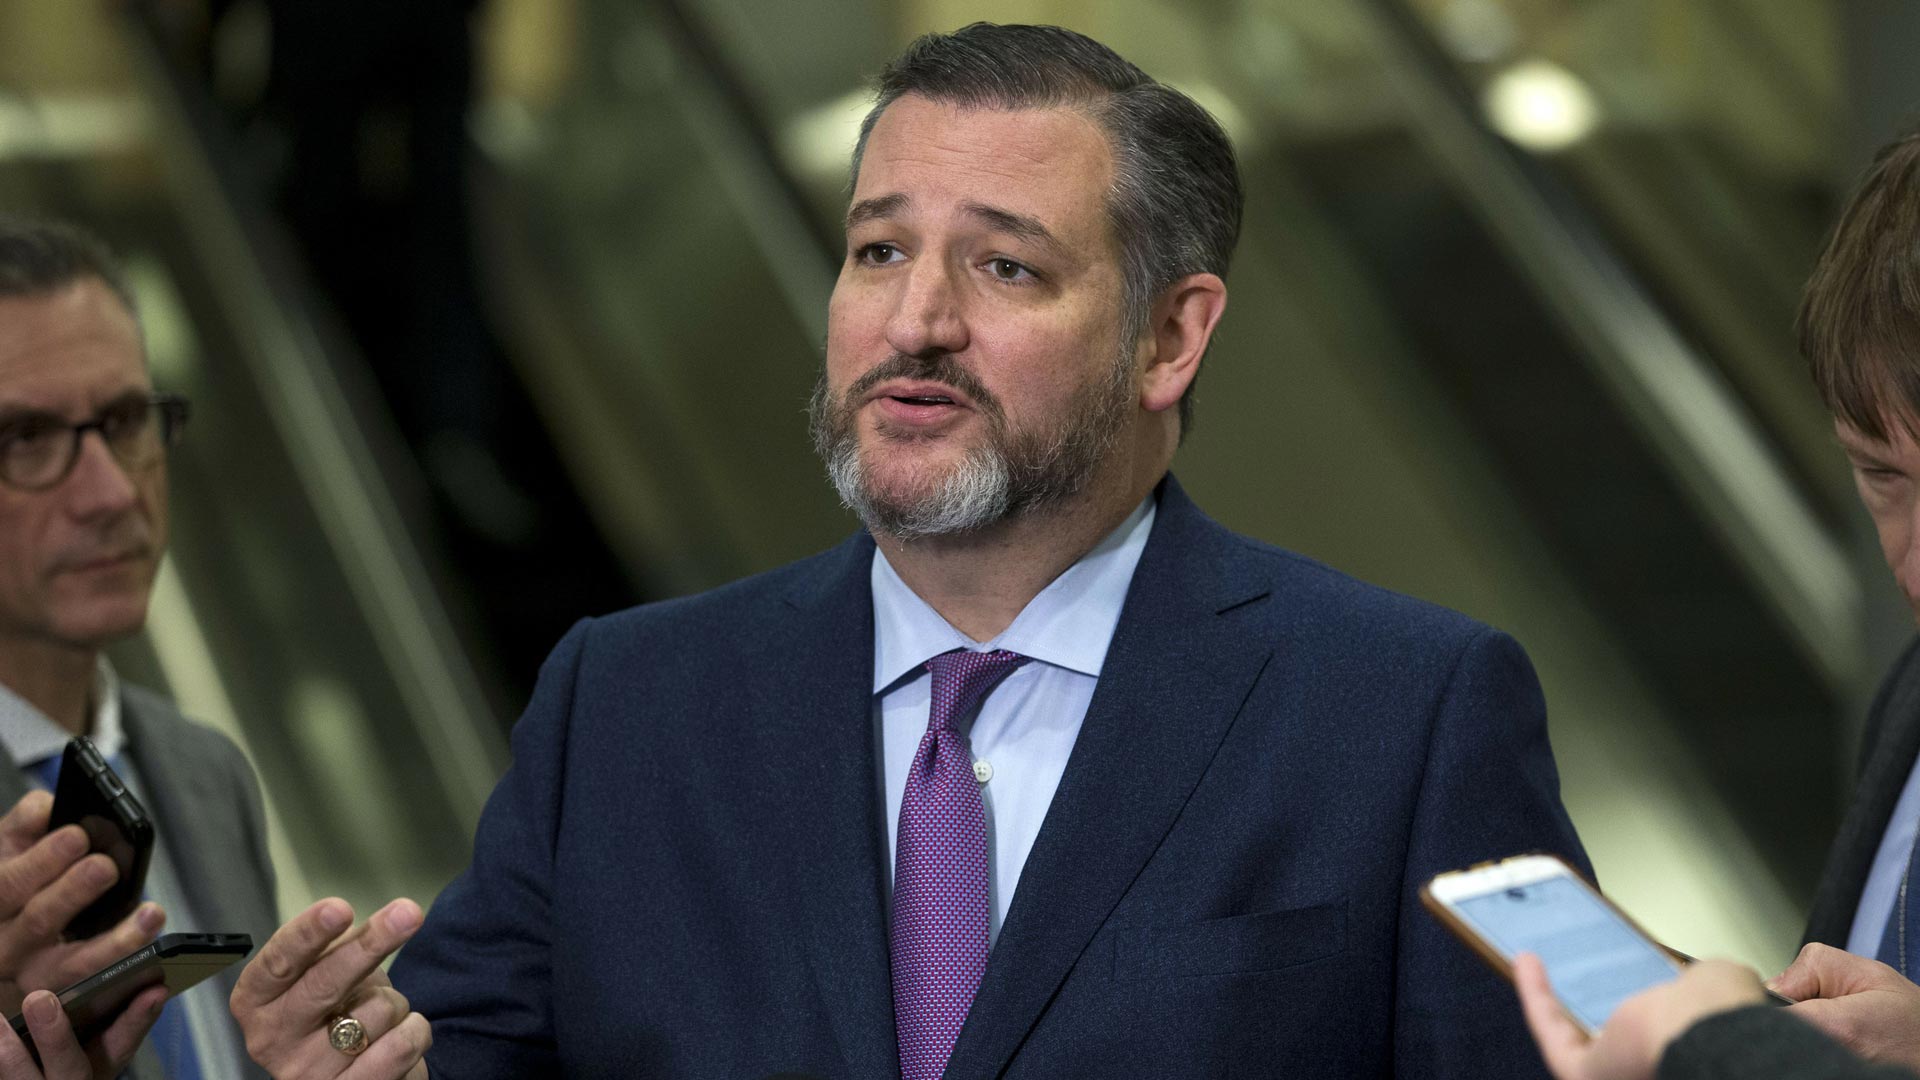 Ted Cruz Shows Compassion over Uganda's 'Kill the Gays' Law and Trolls Attack